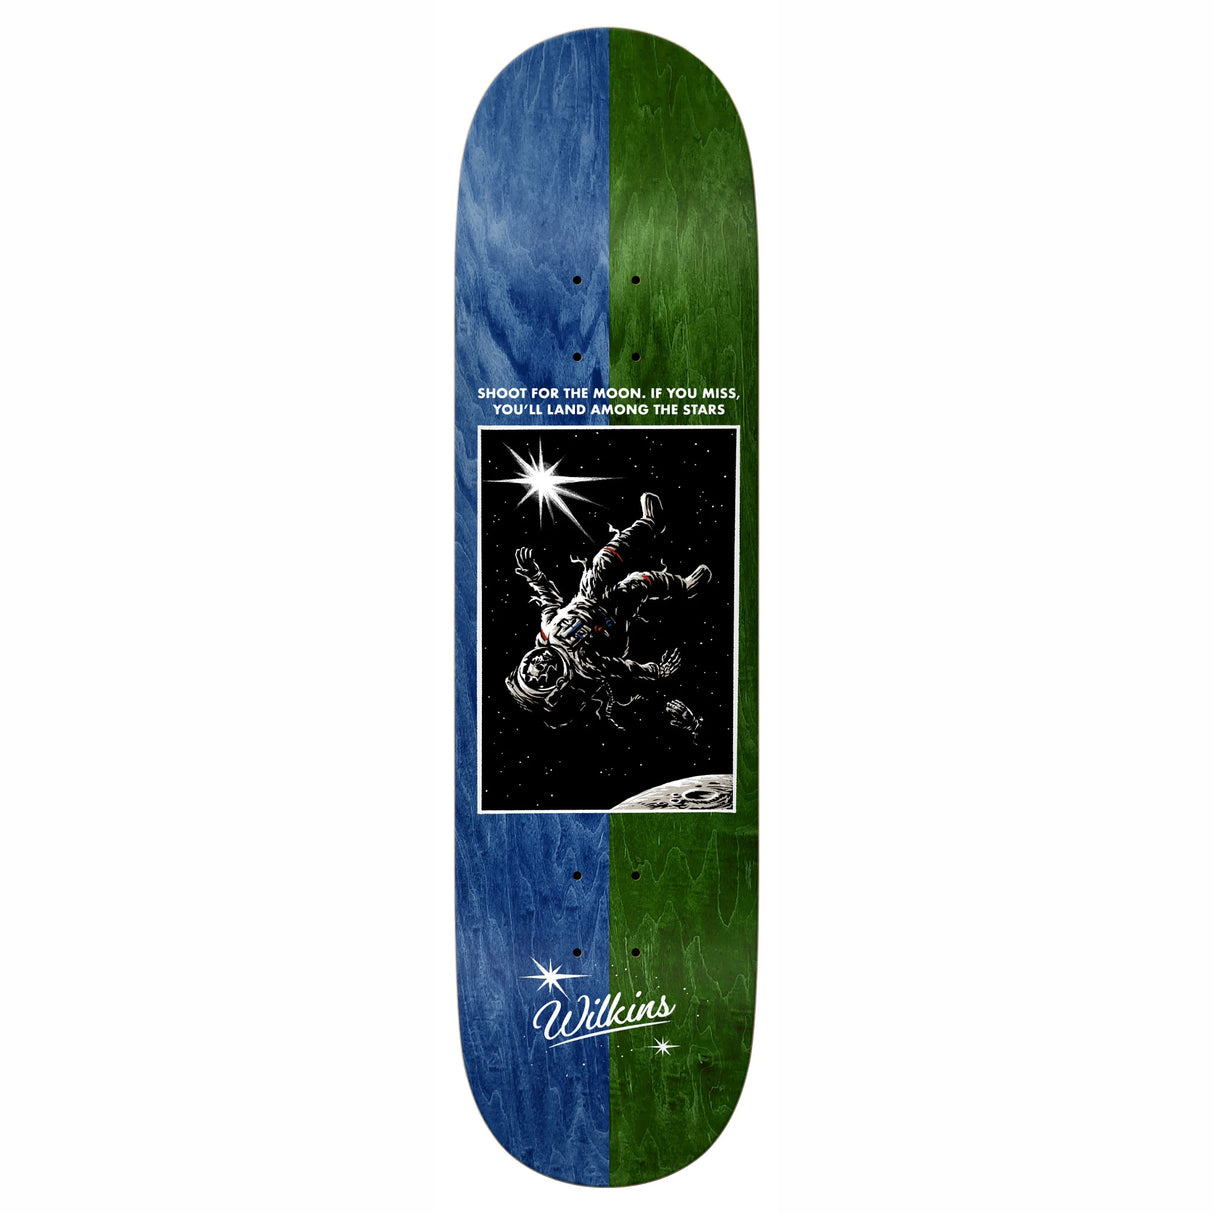 REAL DECK WILKINS BRIGHT SIDE (8.62") - The Drive Skateshop